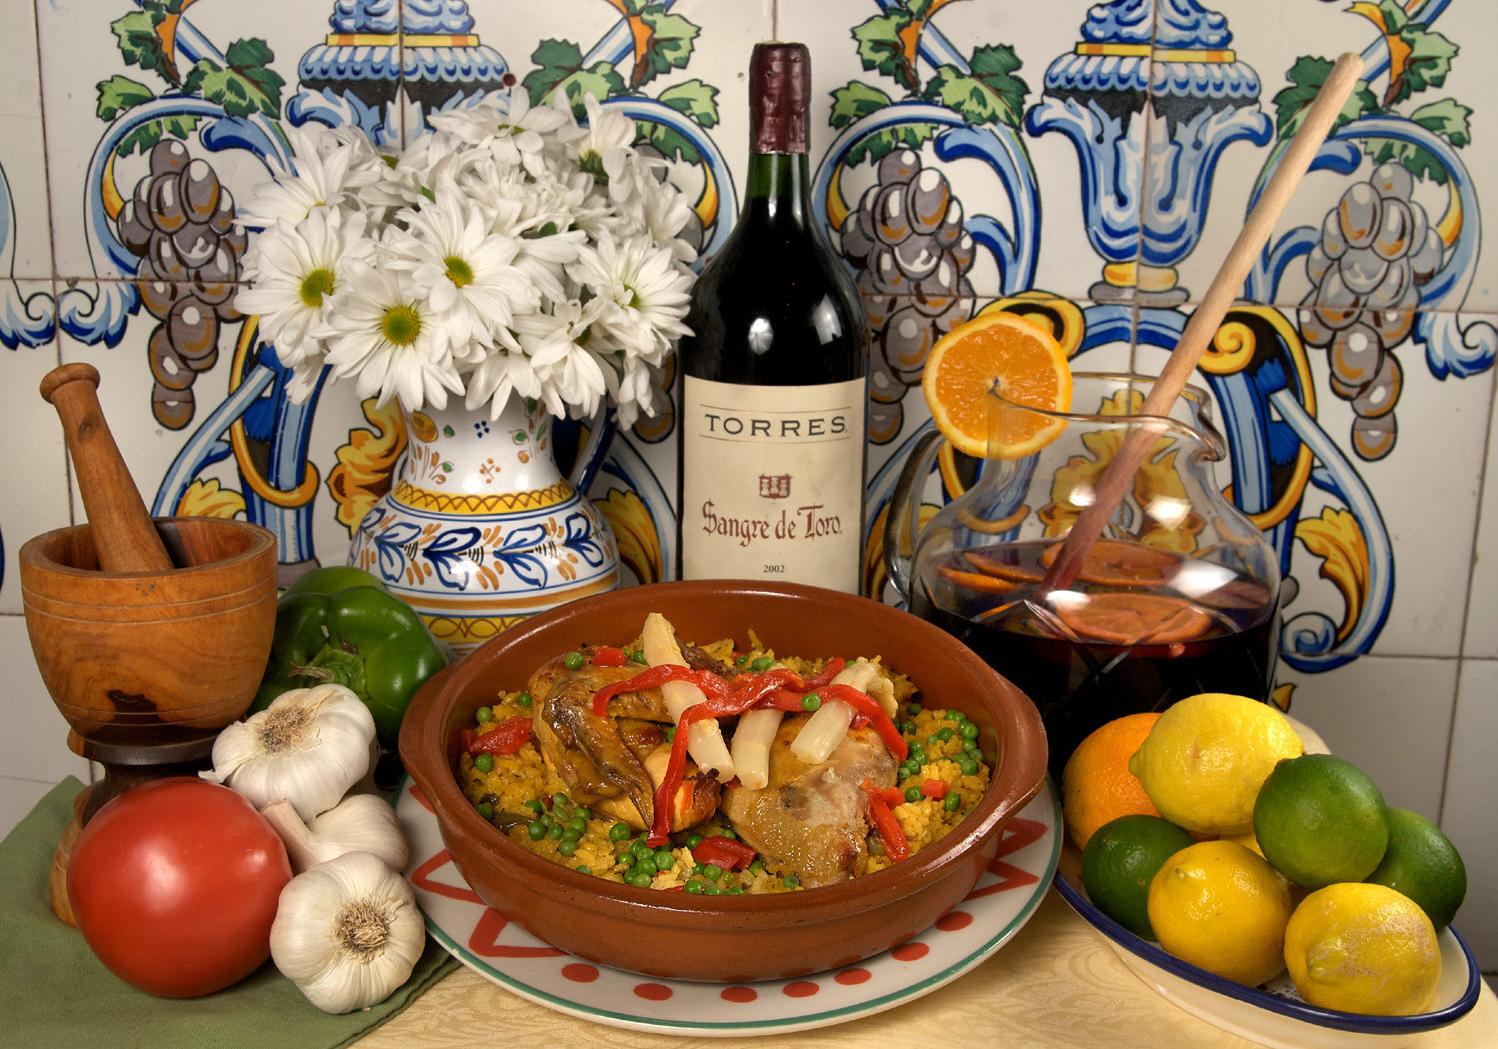  A Spanish-inspired dish with a tropical twist that will transport your senses to a sunny beach.